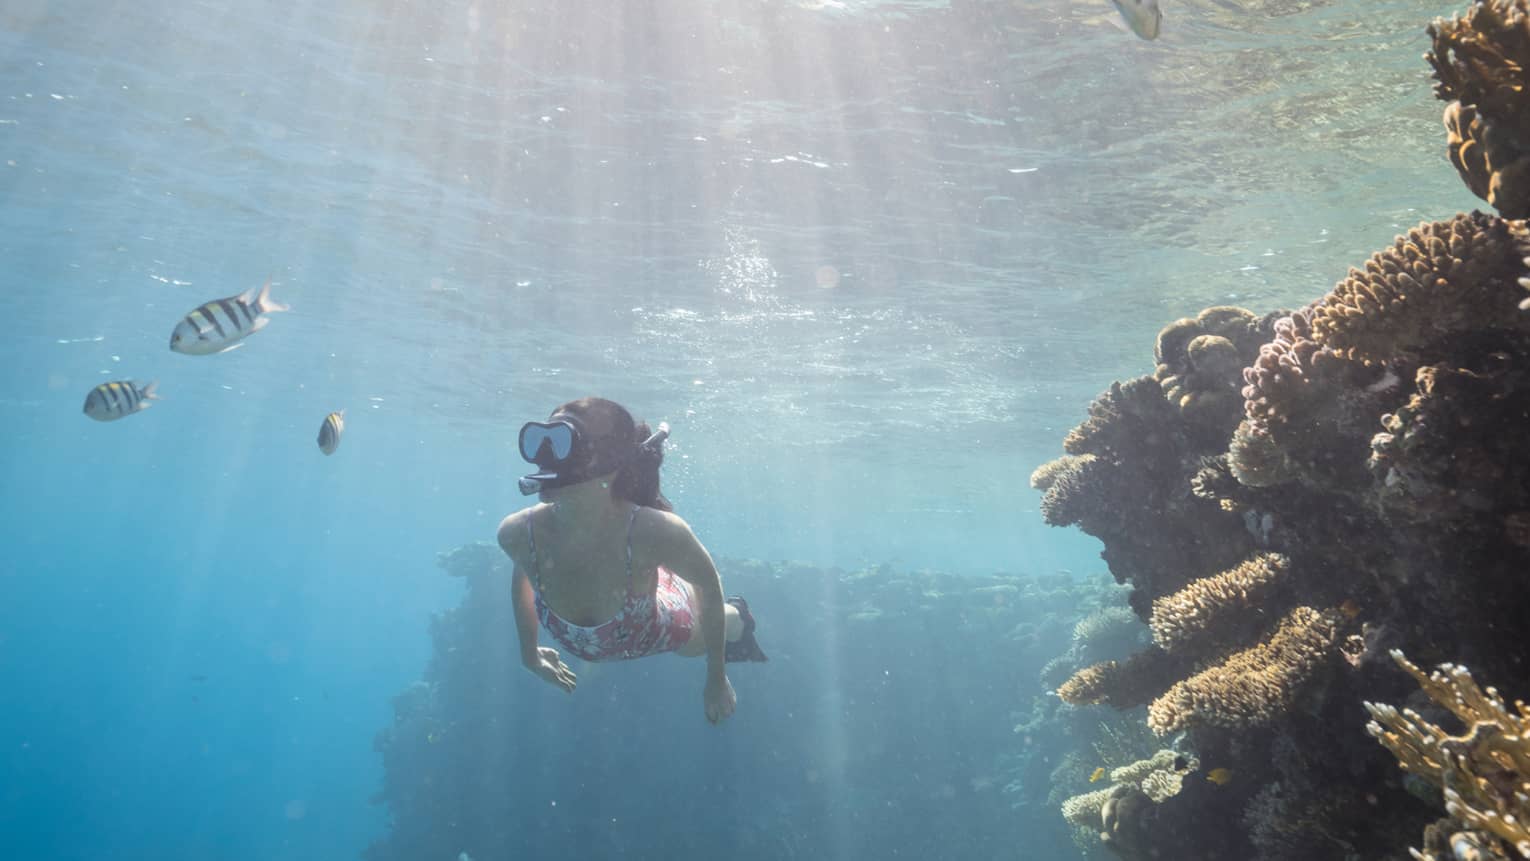 Woman in pink bathing suit snorkels among colourful fish and coral reefs, sunlight streaming through the water's surface